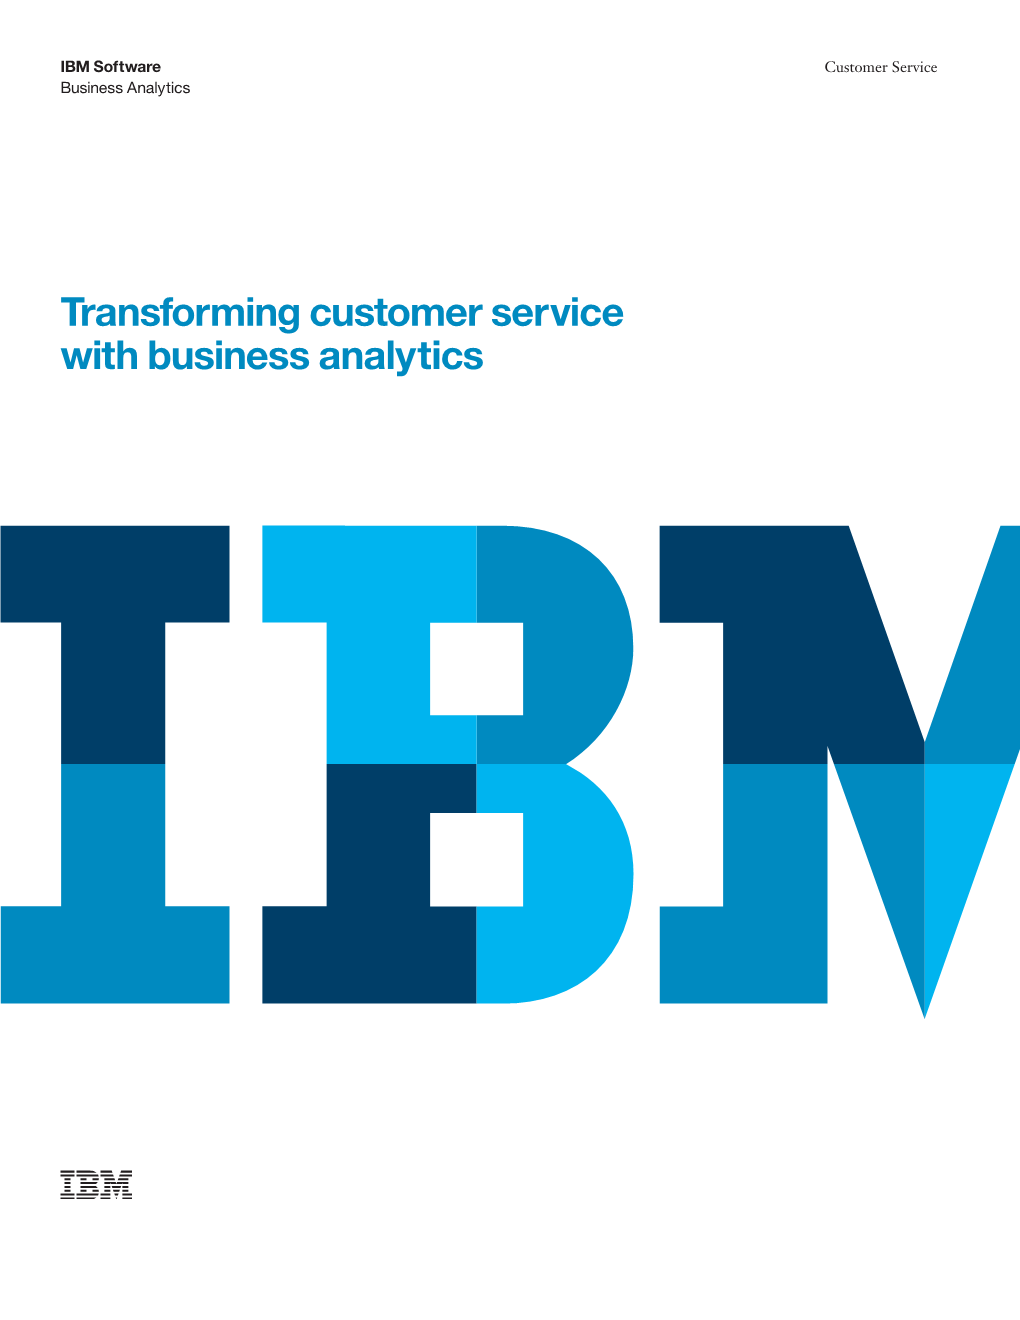 Transforming Customer Service with Business Analytics 2 Transforming Customer Service with Business Analytics